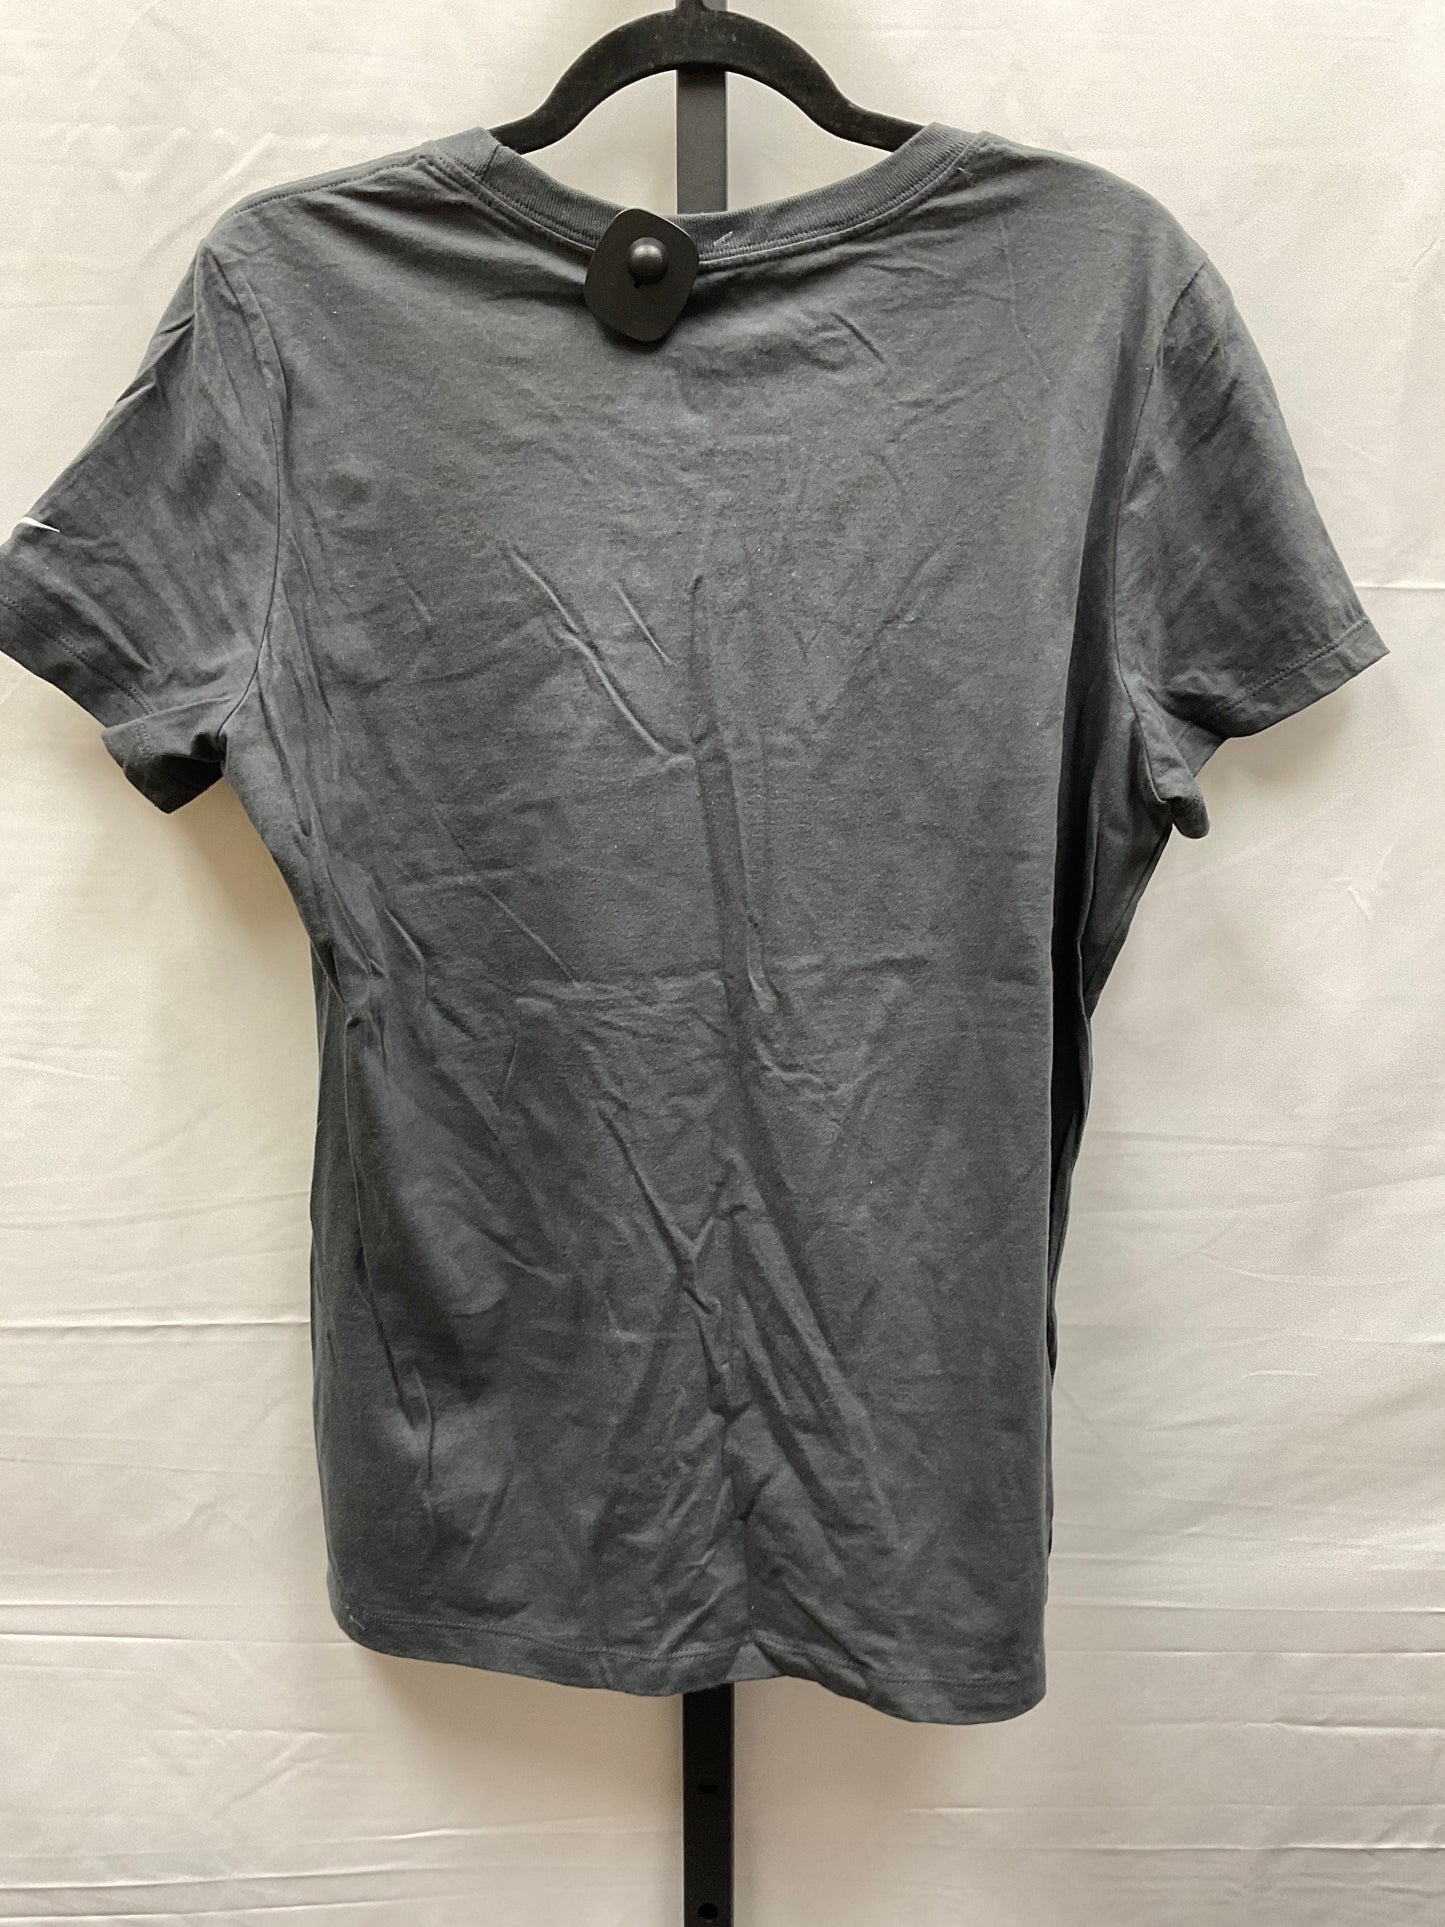 Grey Athletic Top Short Sleeve Nfl, Size L